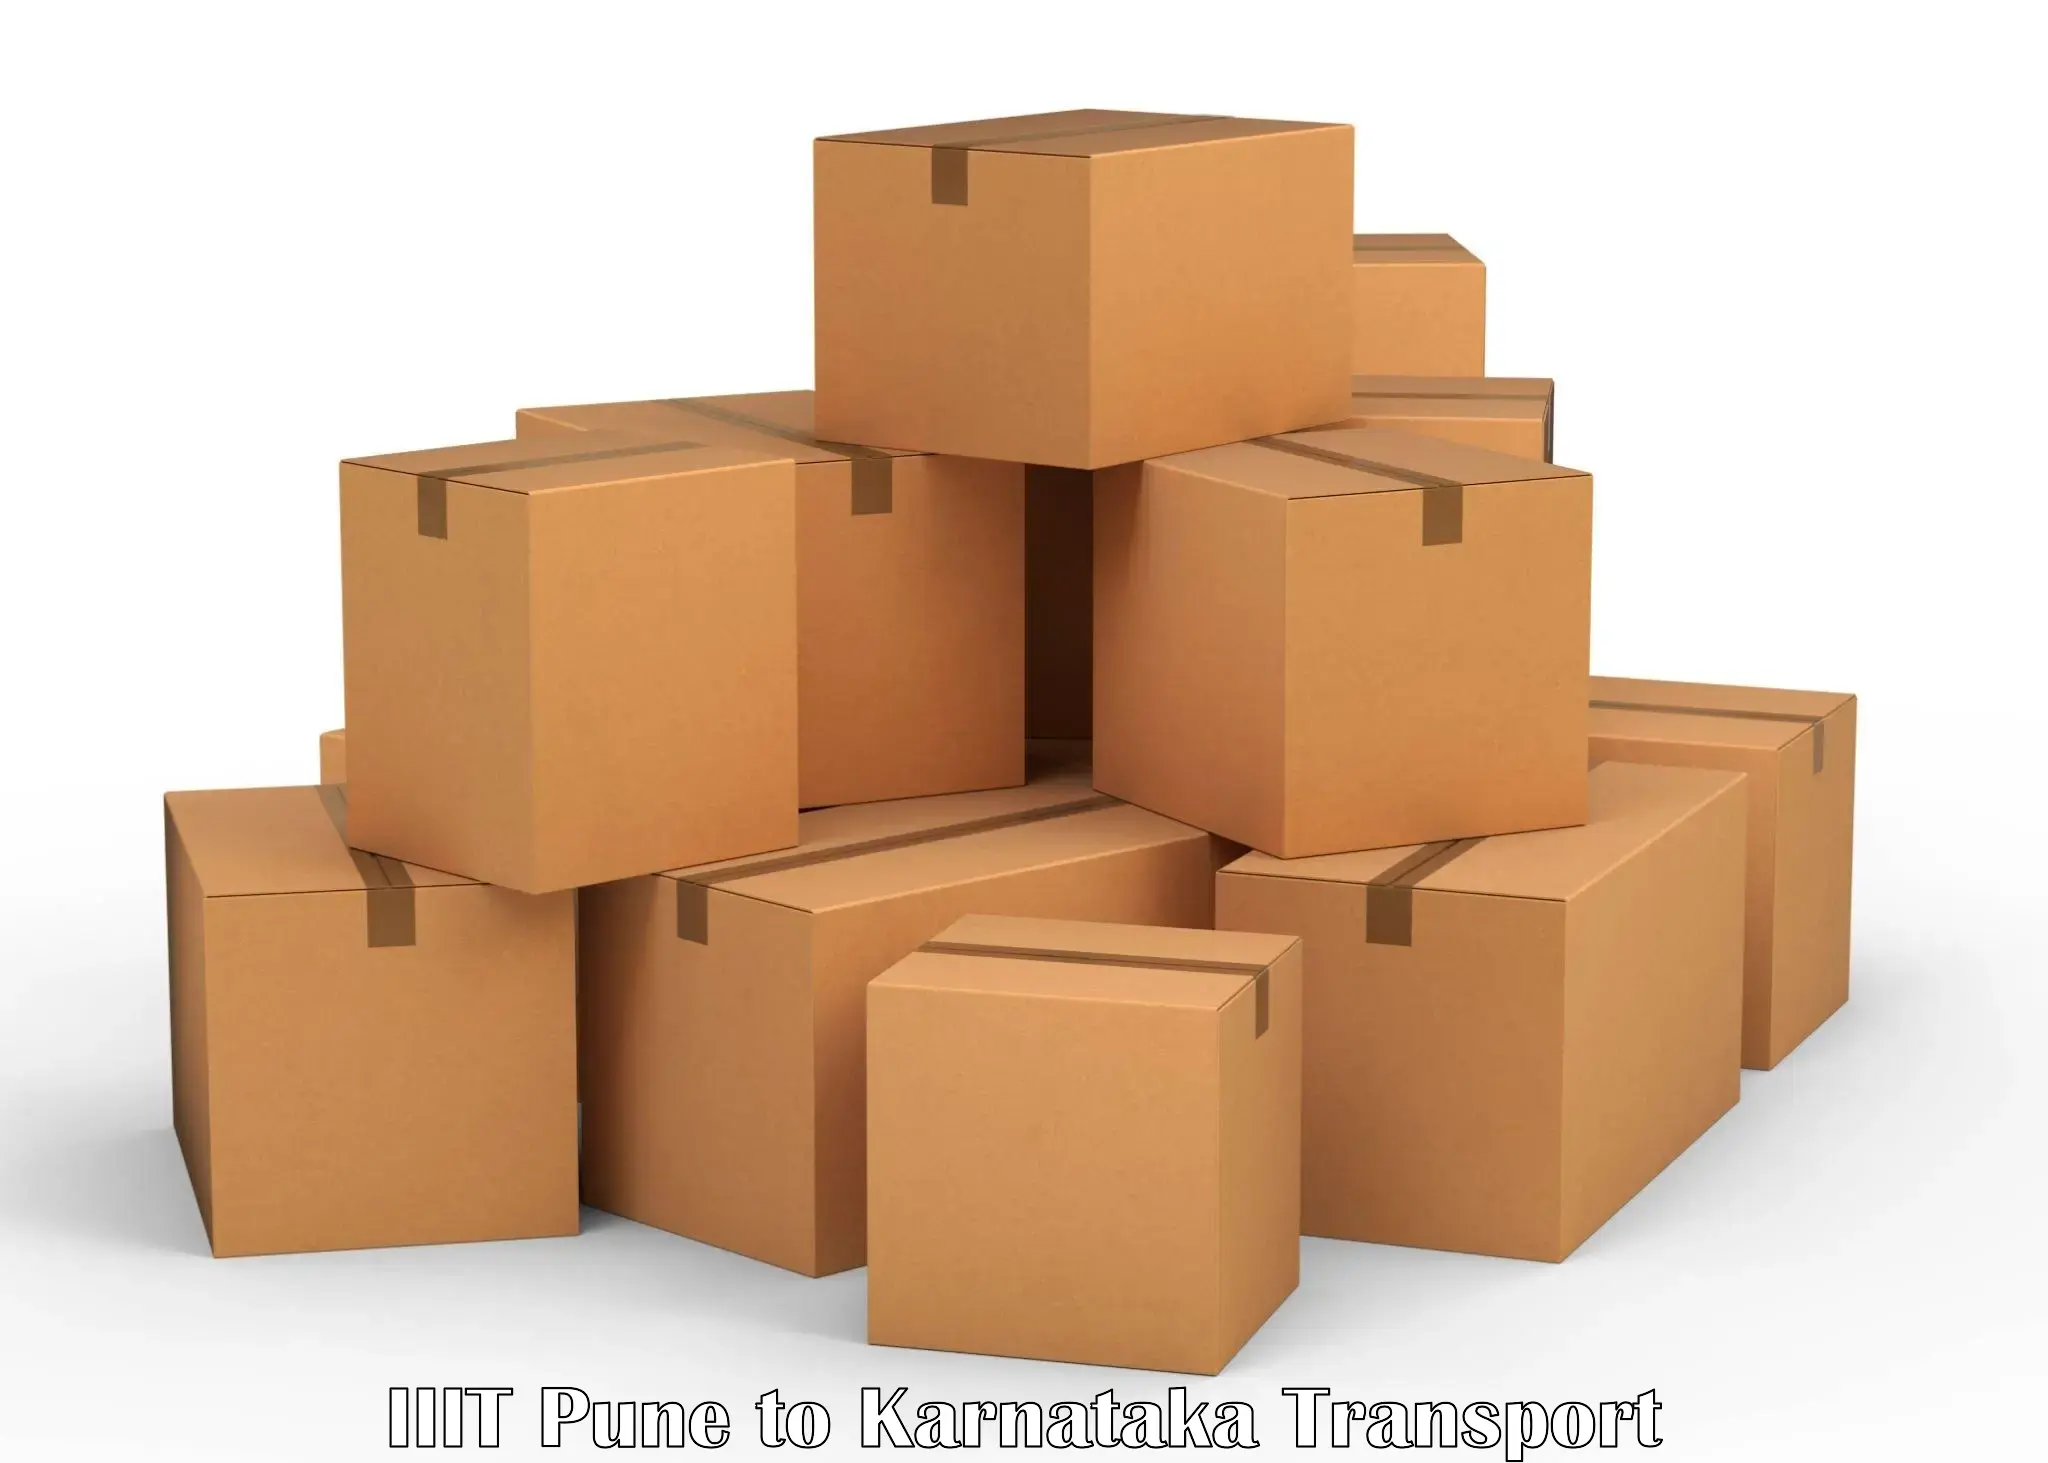 Container transport service IIIT Pune to Bangalore